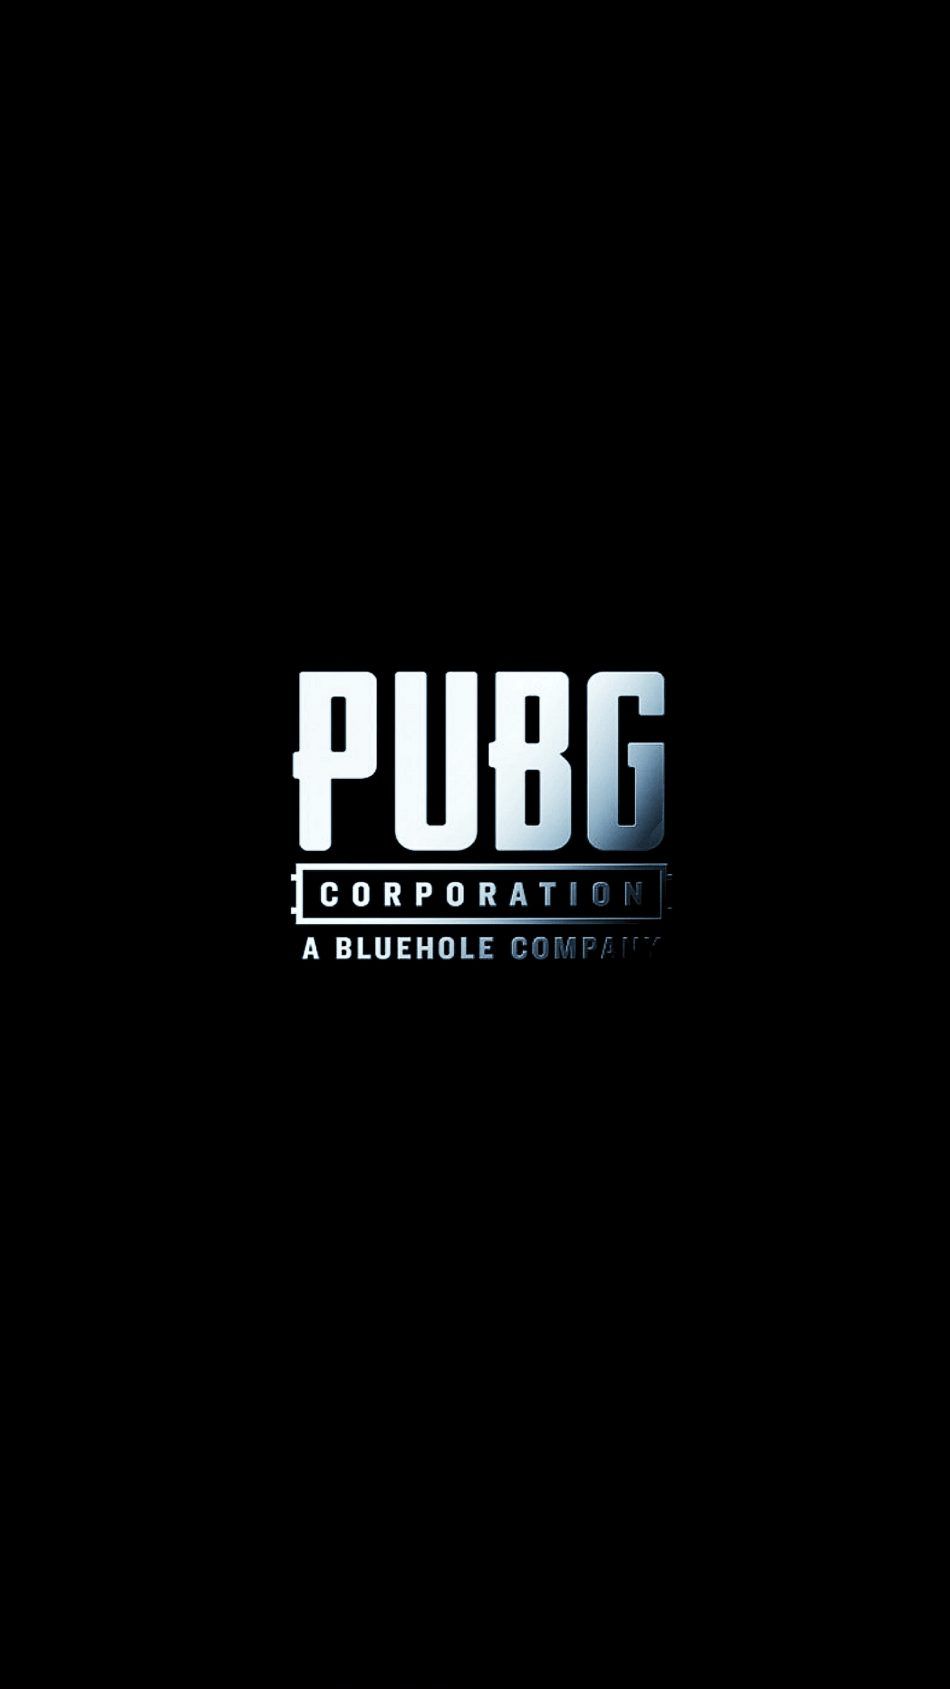 PUBG Corporation Game Opening. Game wallpaper iphone, Mobile